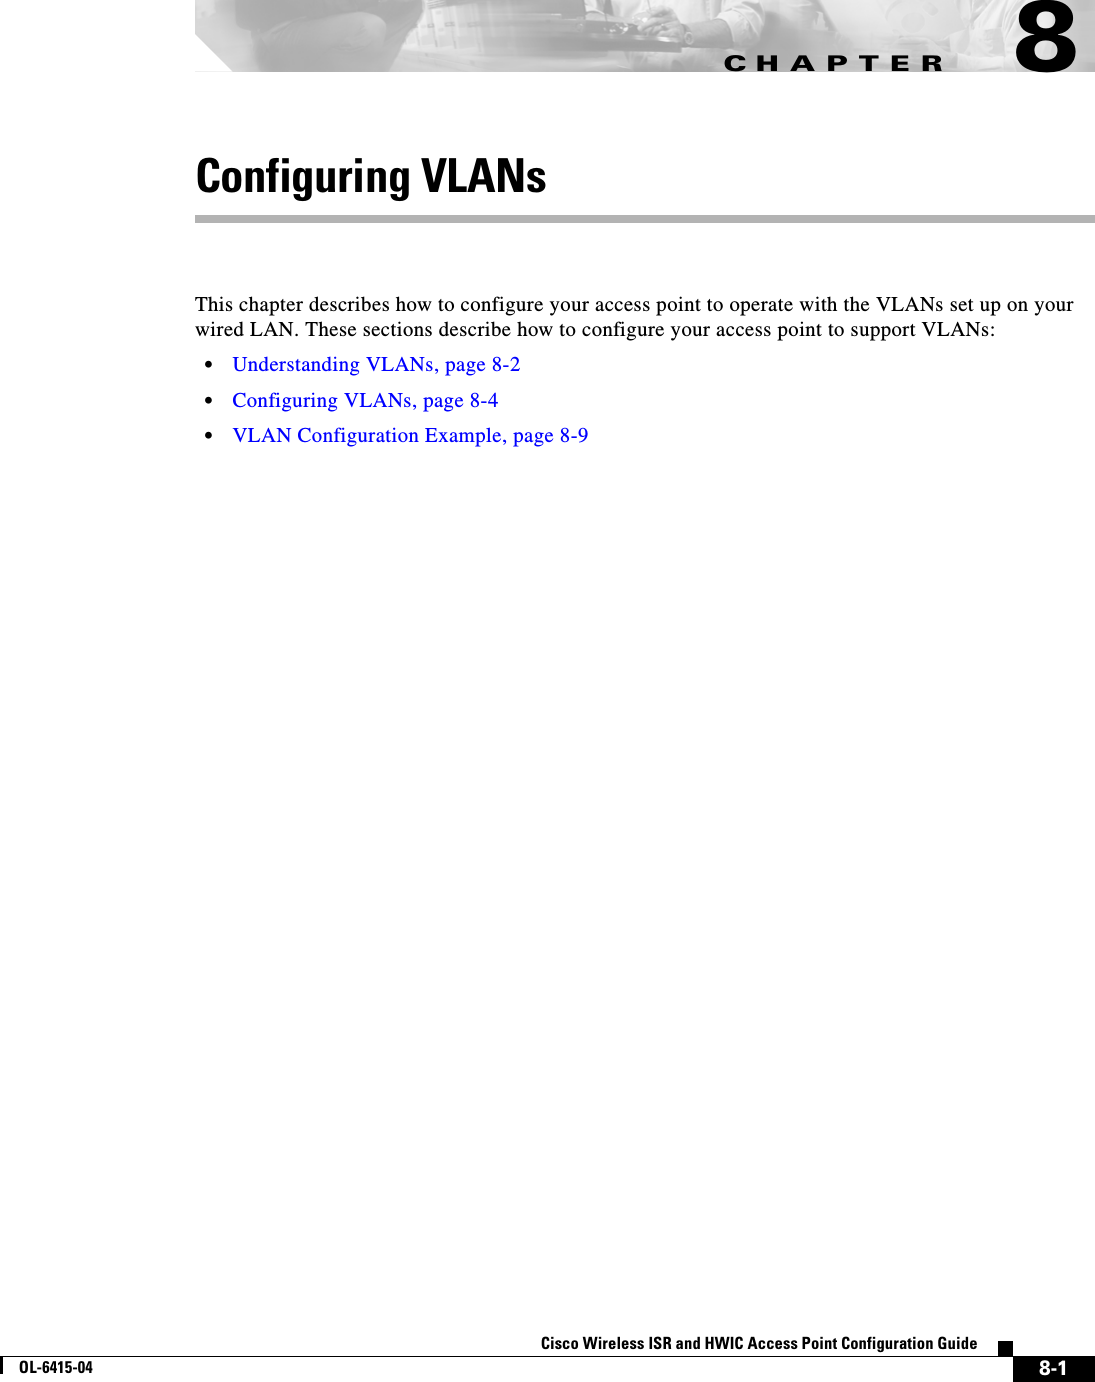 CHAPTER8-1Cisco Wireless ISR and HWIC Access Point Configuration GuideOL-6415-048Configuring VLANsThis chapter describes how to configure your access point to operate with the VLANs set up on your wired LAN. These sections describe how to configure your access point to support VLANs:  • Understanding VLANs, page 8-2  • Configuring VLANs, page 8-4  • VLAN Configuration Example, page 8-9